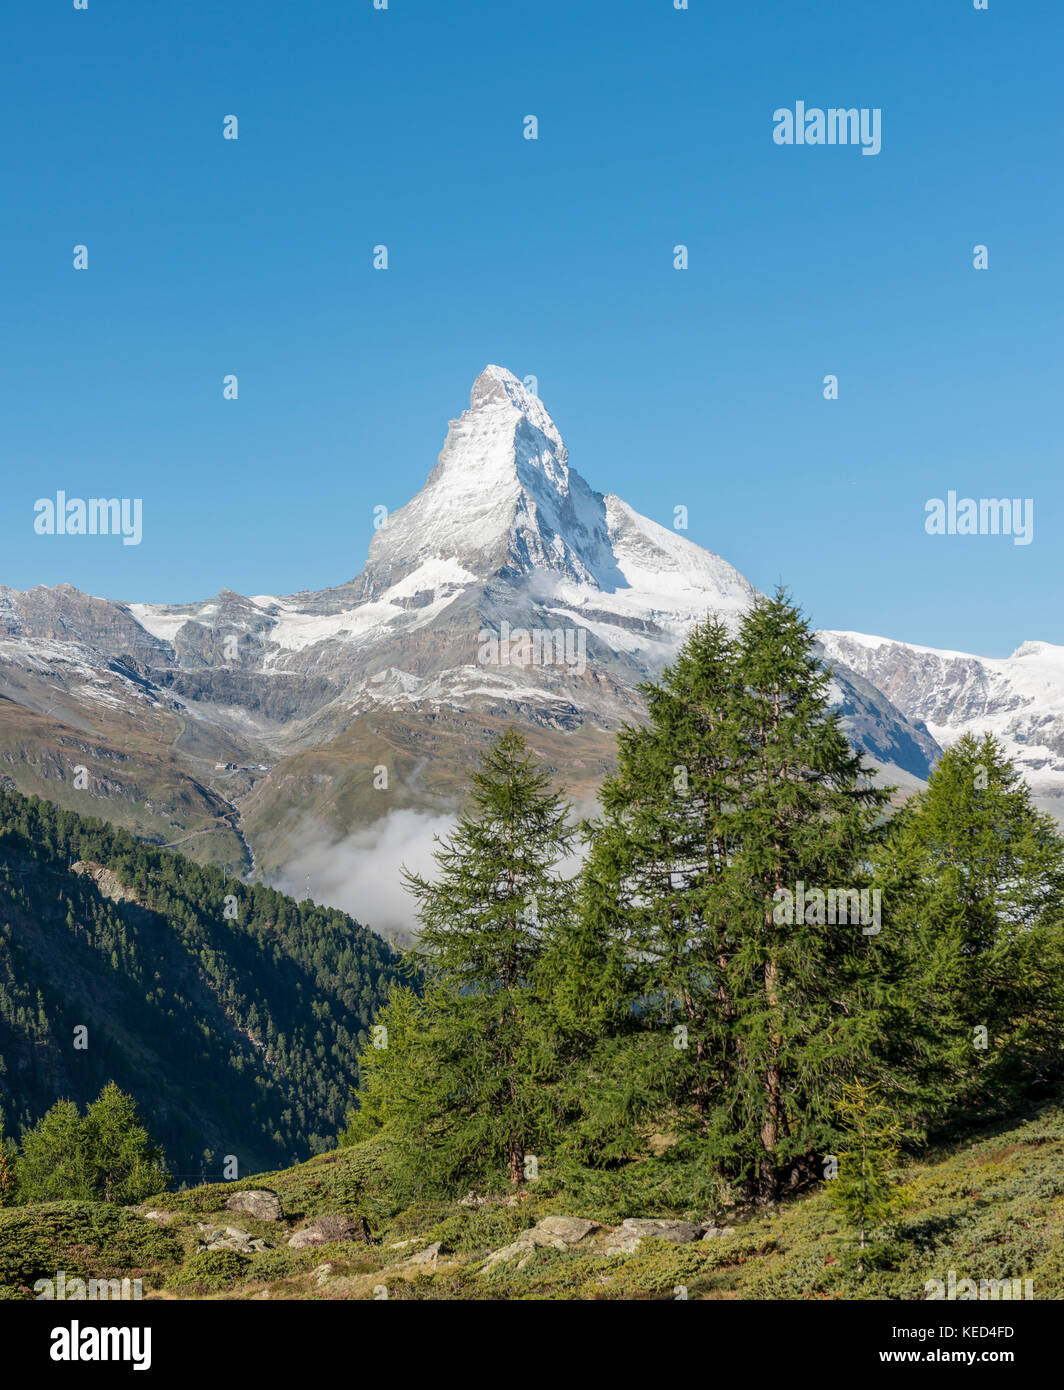 Mountain landscape, spruce in front of snow-covered Matterhorn, Valais, Switzerland Stock Photo